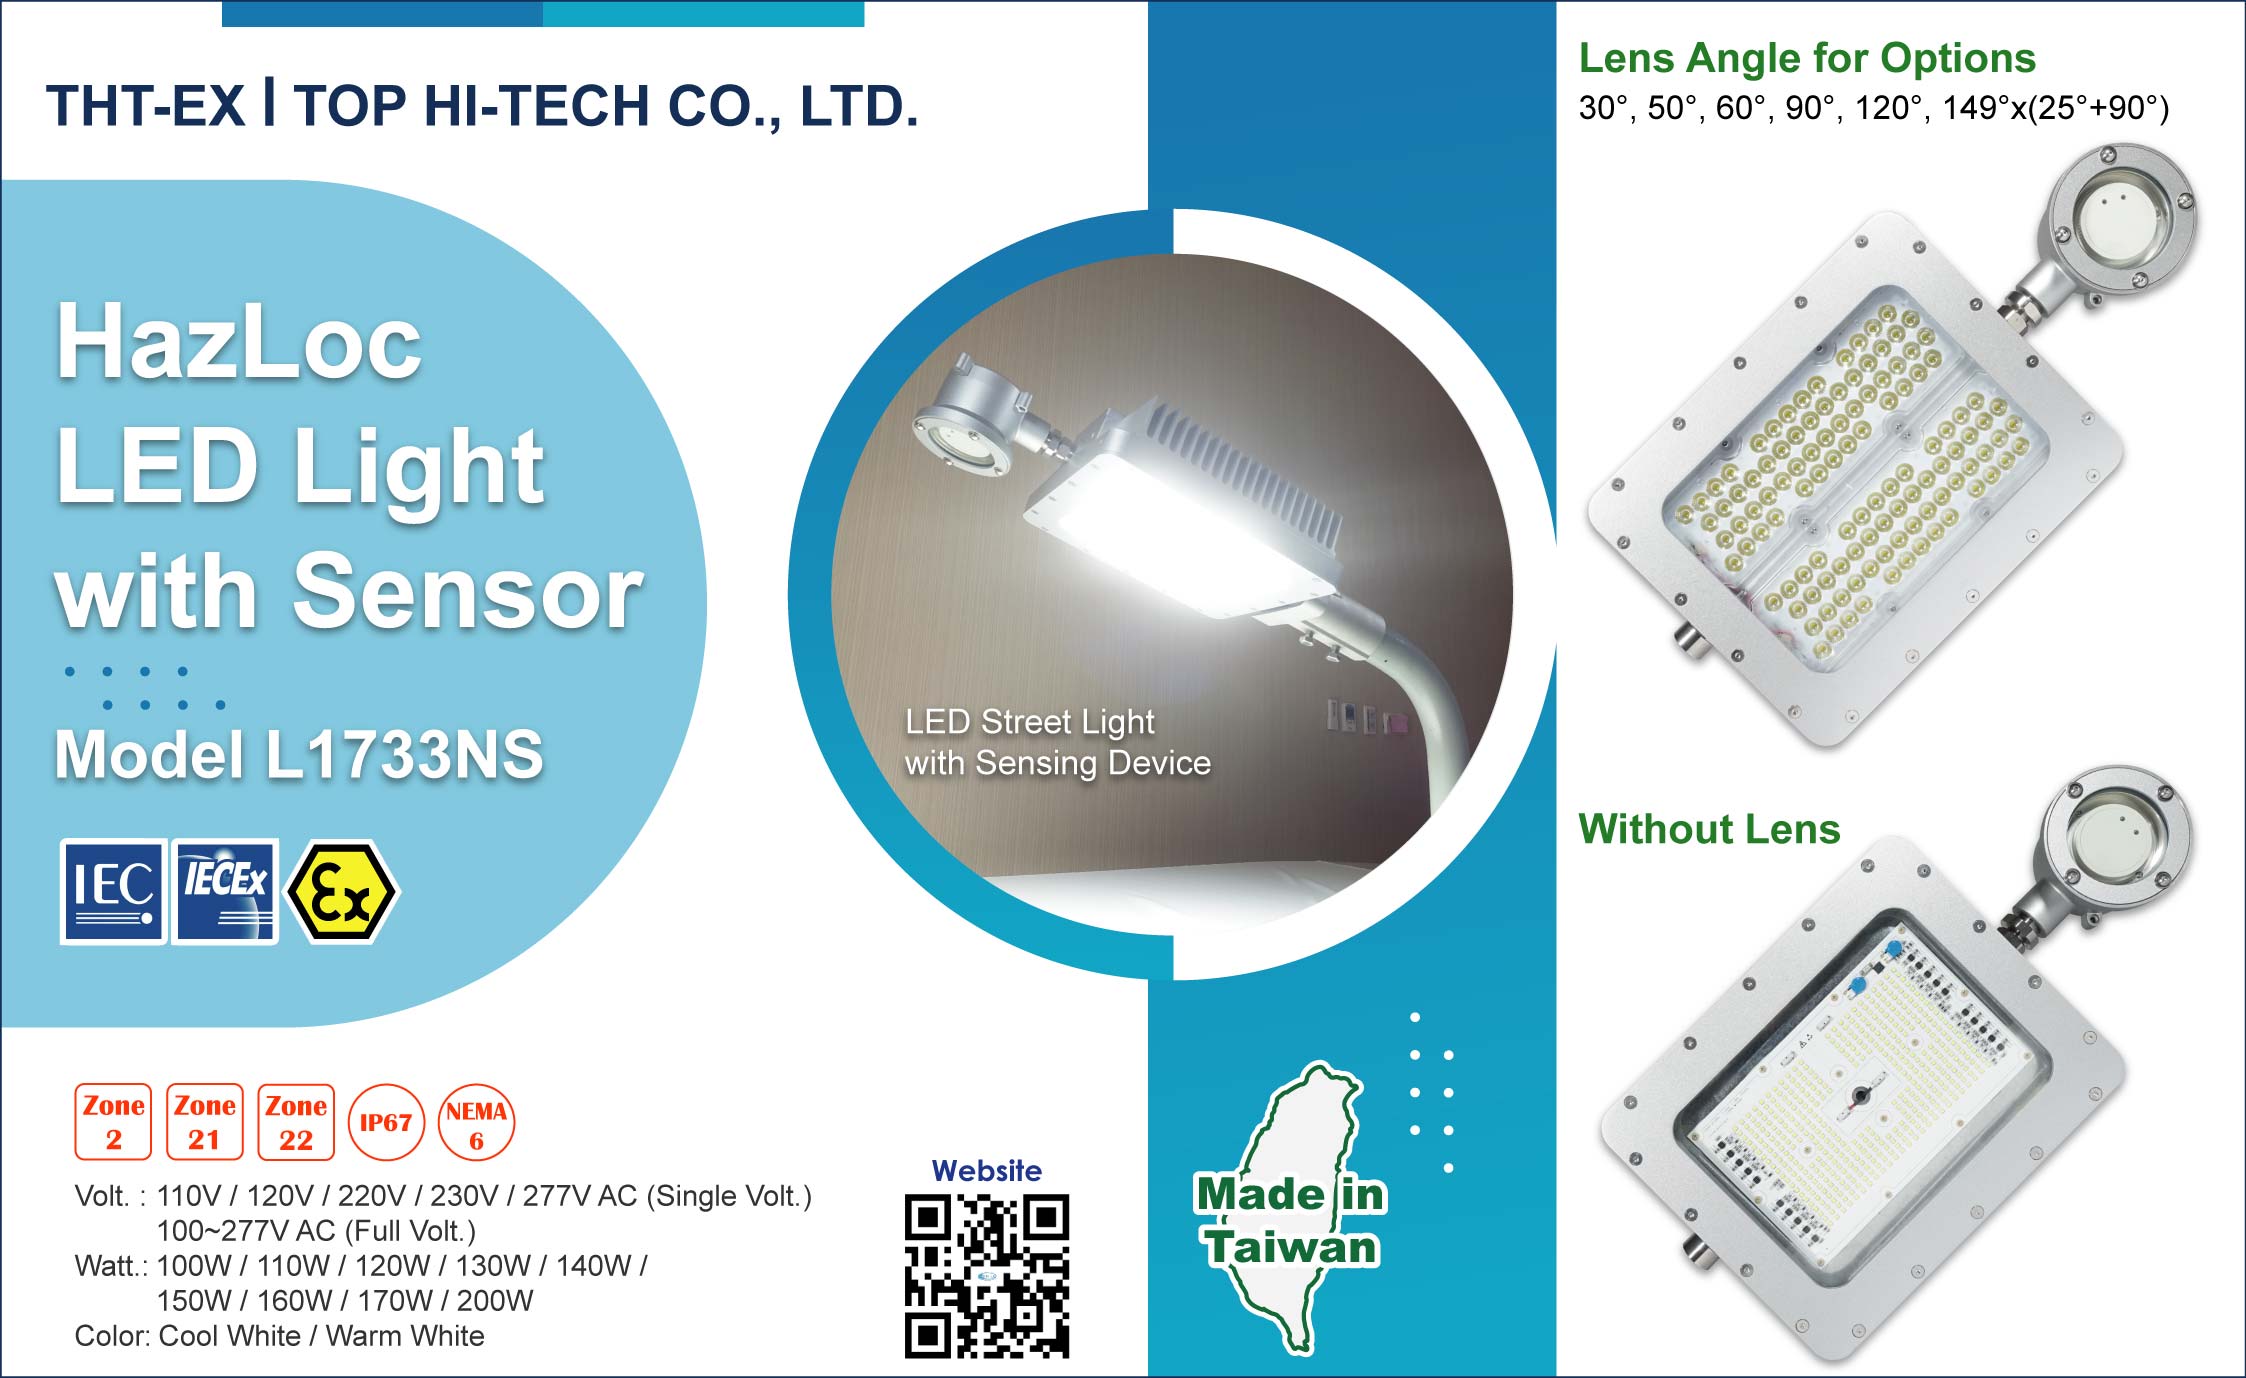  New Product! Energy Saving! Explosion-proof Light with Sensor - Model L1733NS